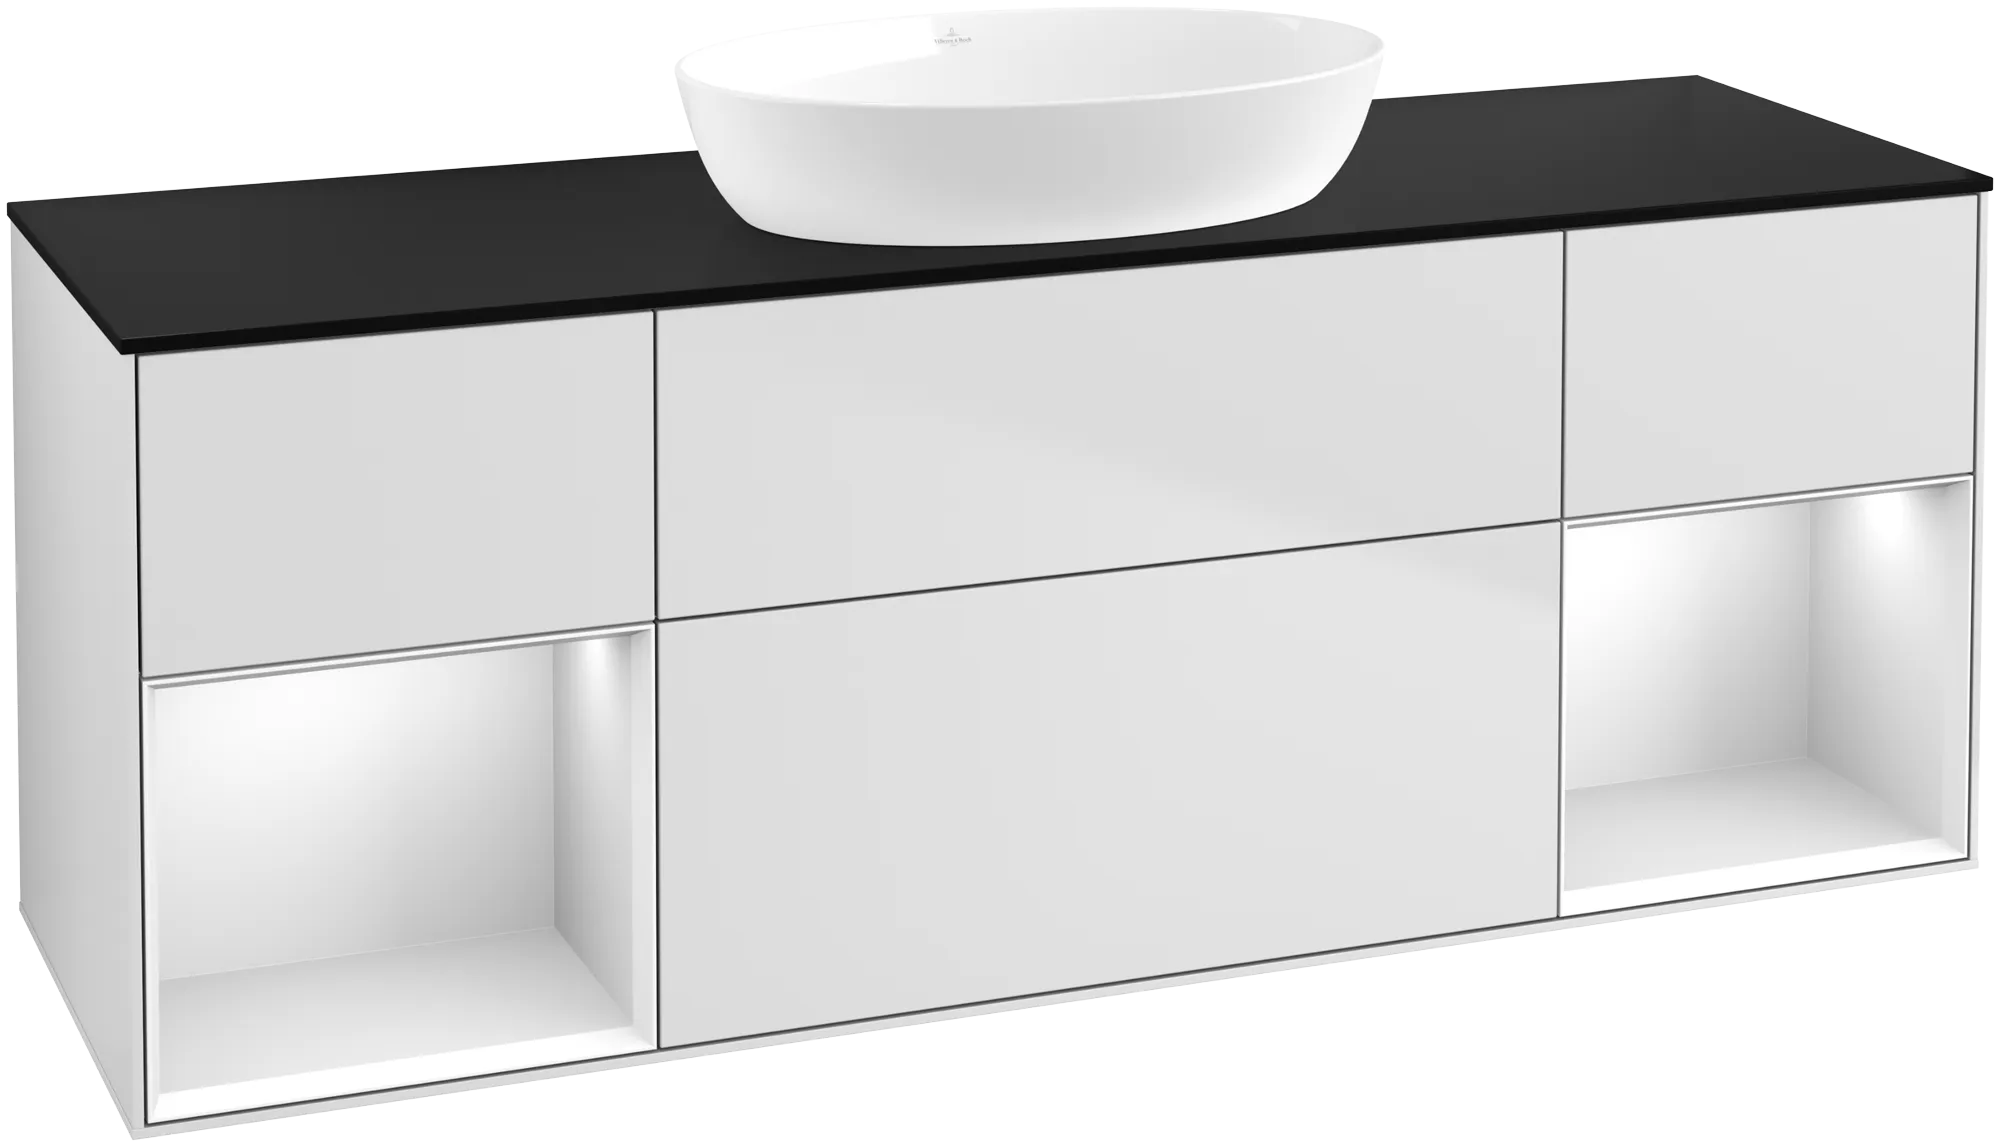 Picture of VILLEROY BOCH Finion Vanity unit, with lighting, 4 pull-out compartments, 1600 x 603 x 501 mm, White Matt Lacquer / White Matt Lacquer / Glass Black Matt #FD02MTMT